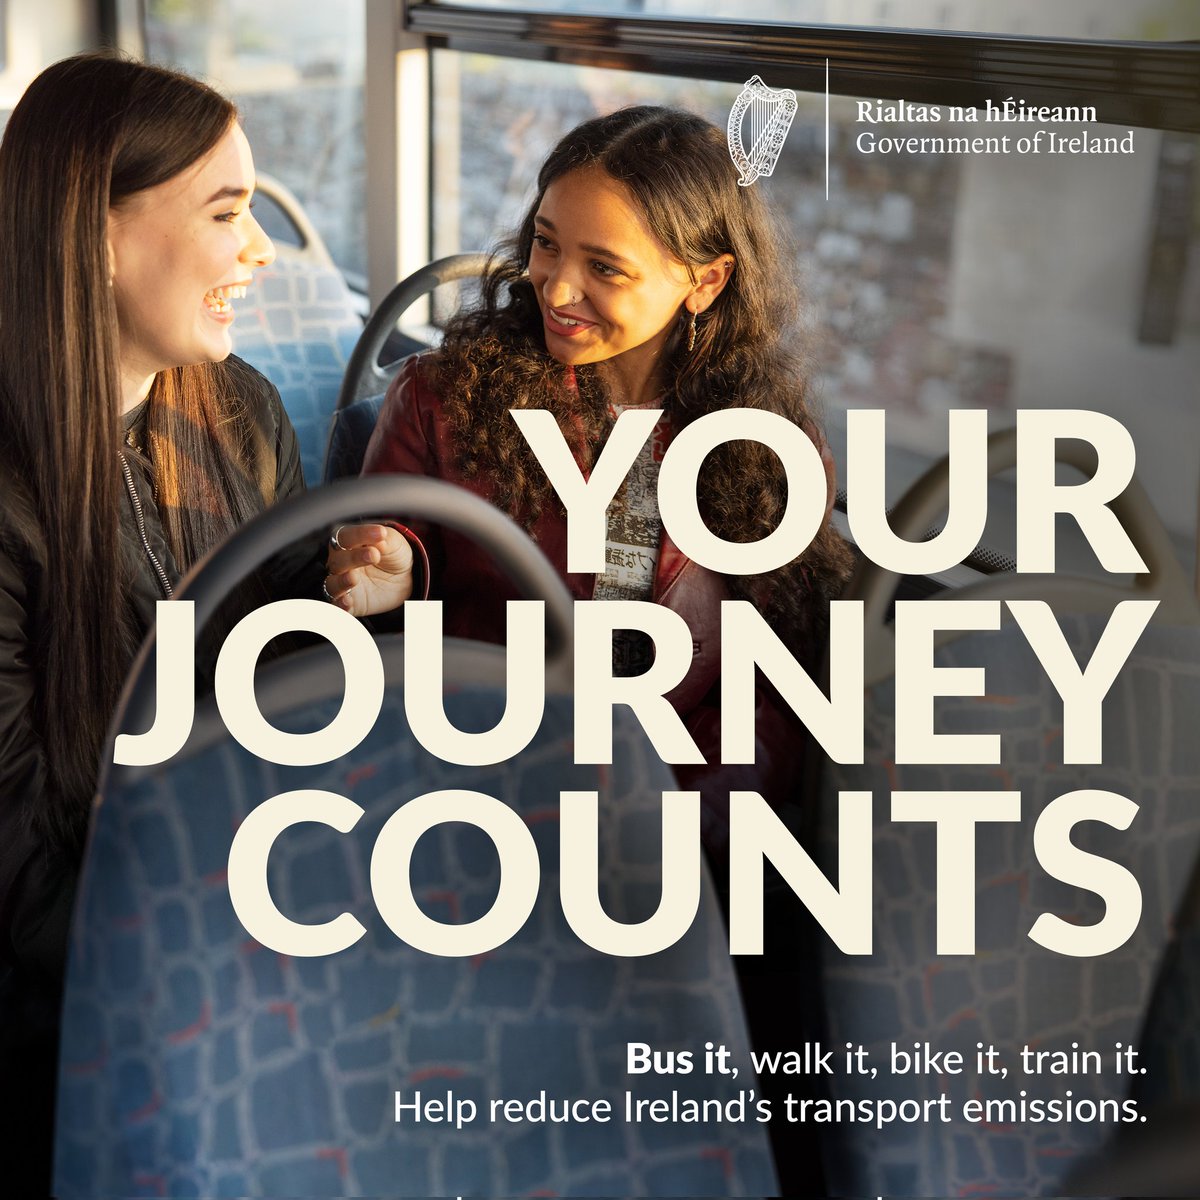 Every time you walk, cycle, or take public transport, you’re helping reduce transport emissions. Wherever you’re going, your journey counts. gov.ie/YourJourneyCou… #YourJourneyCounts @EamonRyan @jackfchambers @TFIupdates